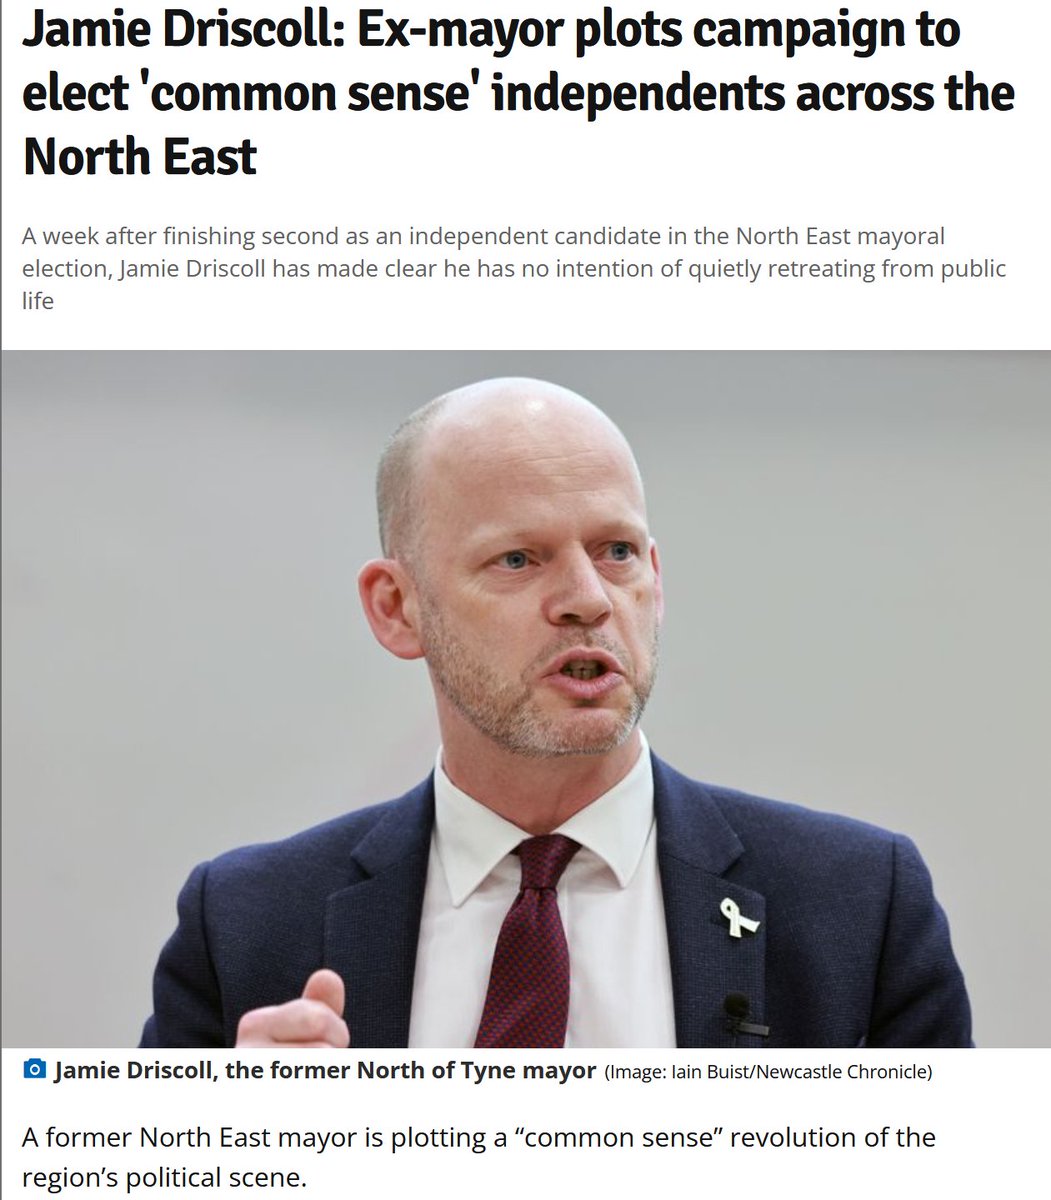 Gotta love headline writers – openly telling the public what you’re doing is hardly plotting. Many people have been in touch who want accountable politicians delivering common sense policies like decent public services and an end to privatised utilities fleecing us. Get in touch…